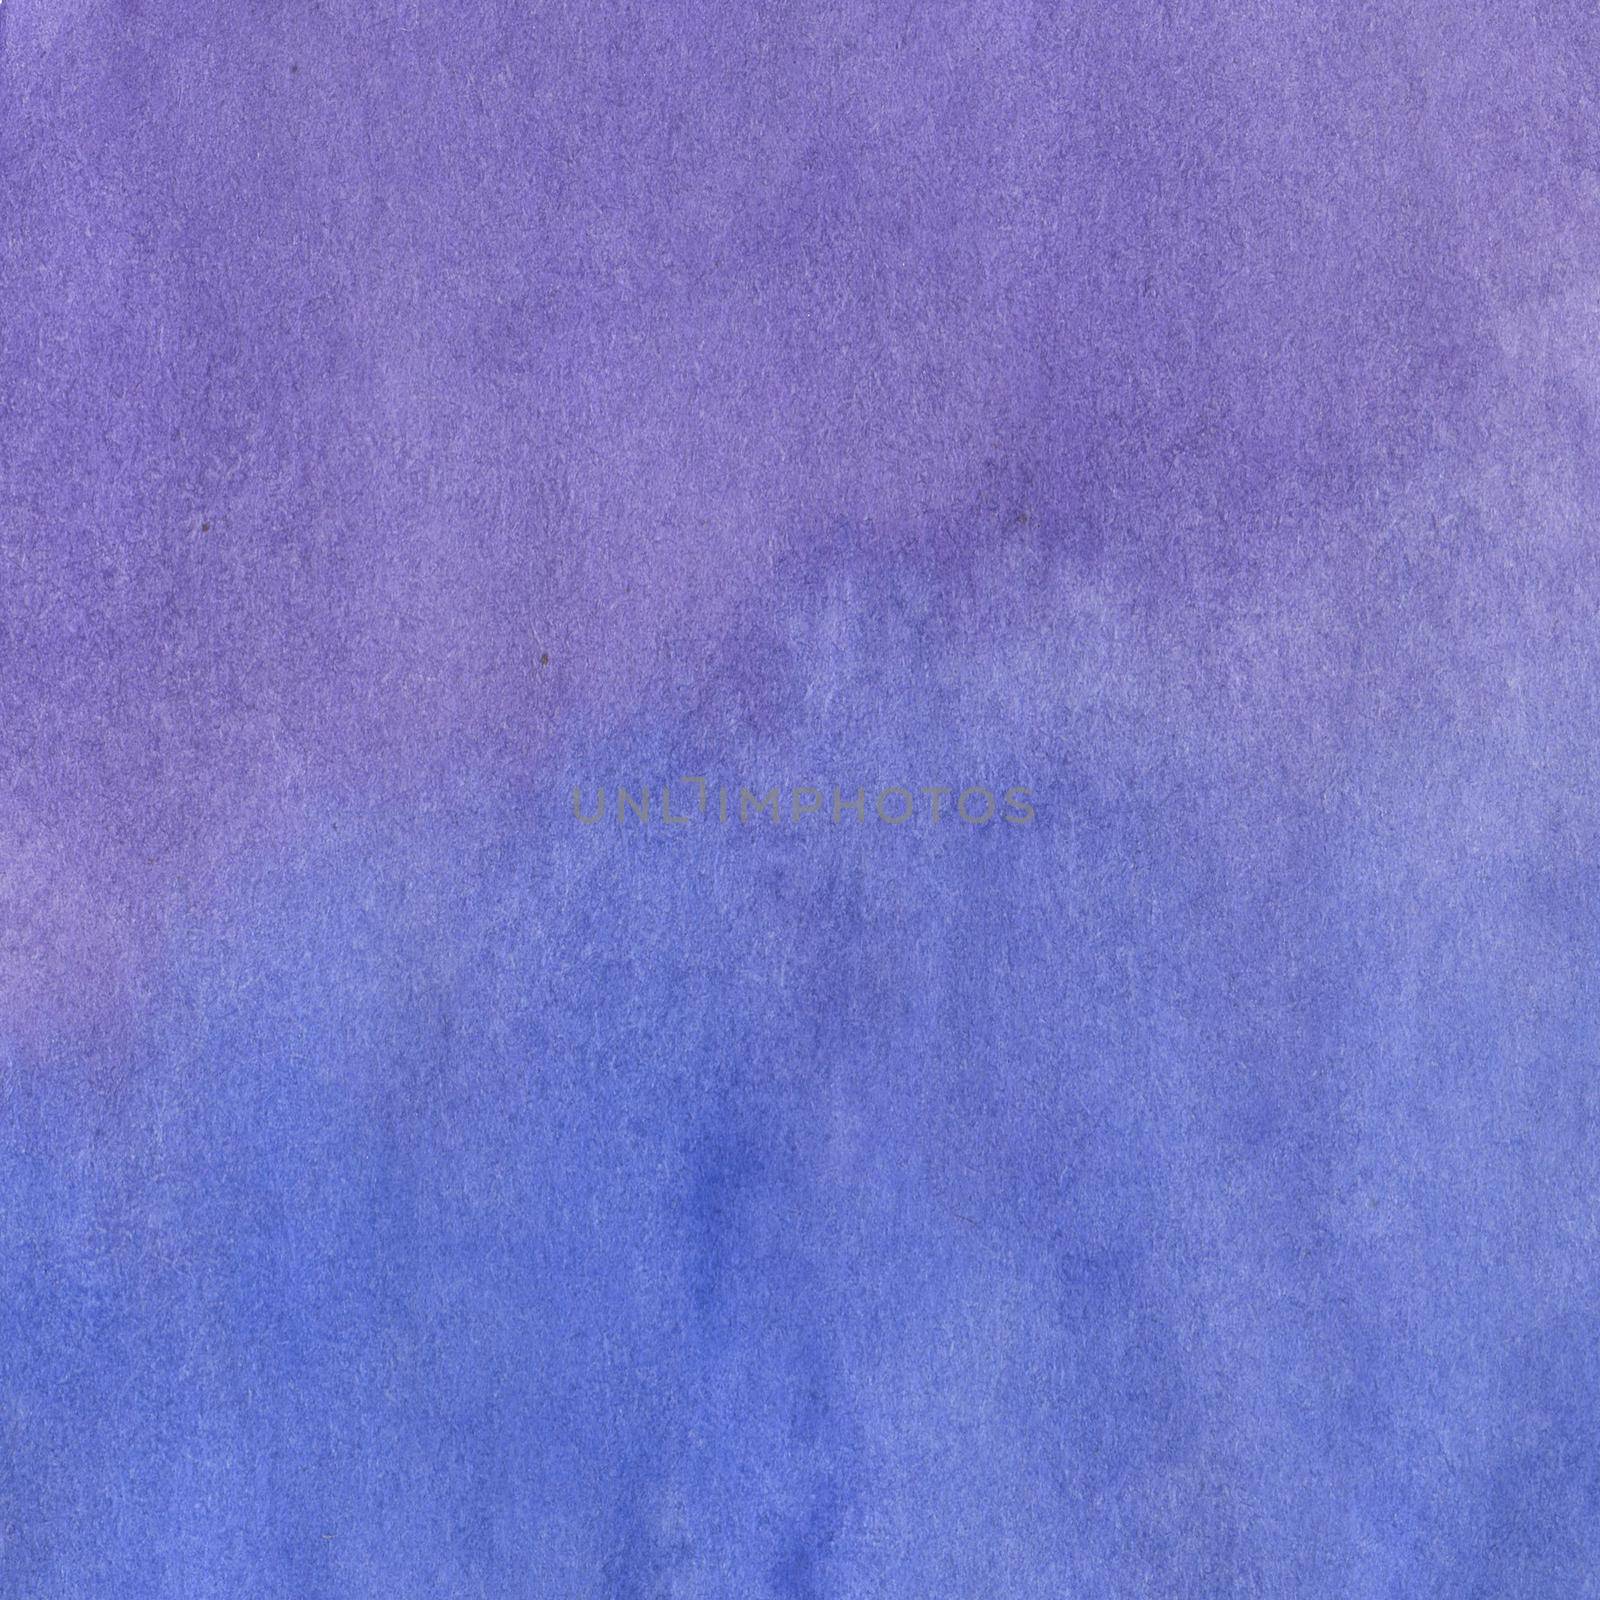 Blue and Purple Hand Drawn Watercolor Abstract Background. by Rina_Dozornaya